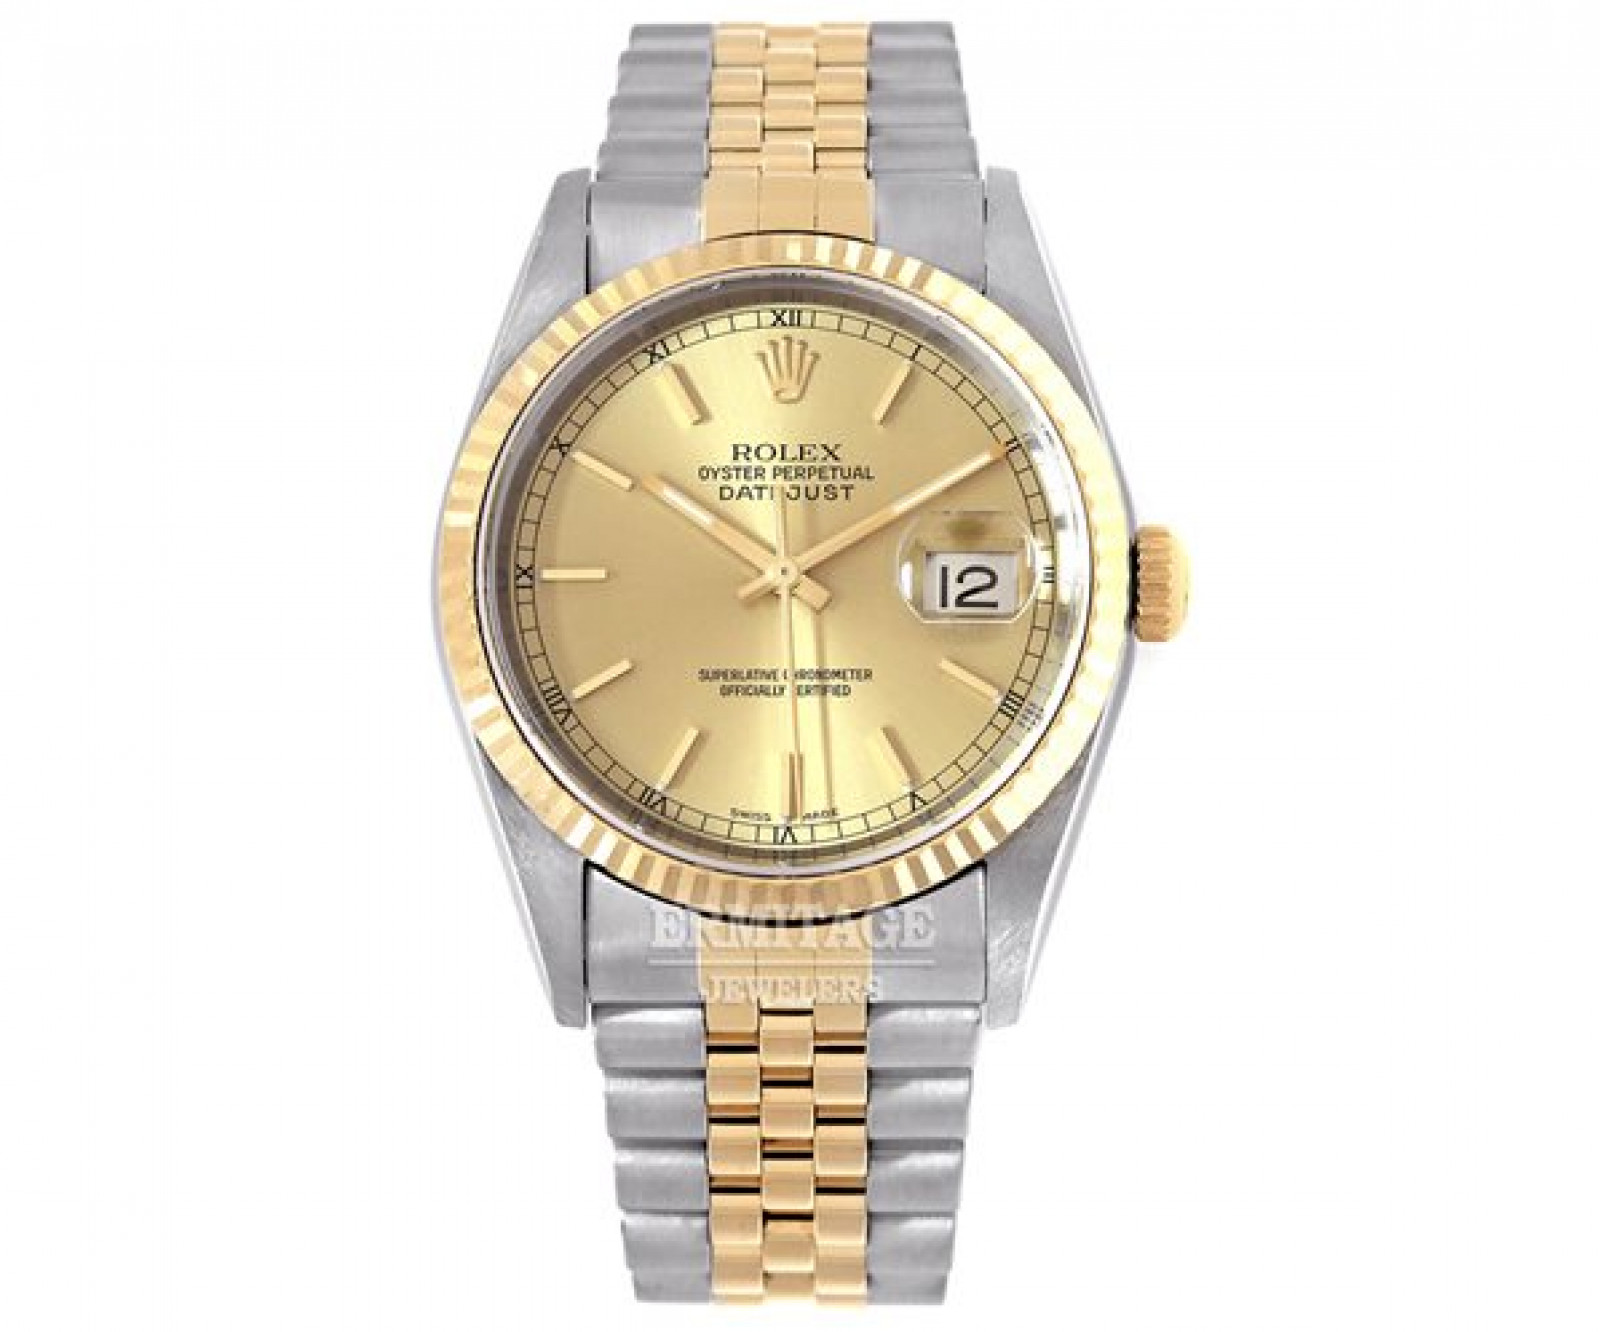 Rolex Oyster Perpetual Datejust 16233 Gold & Steel